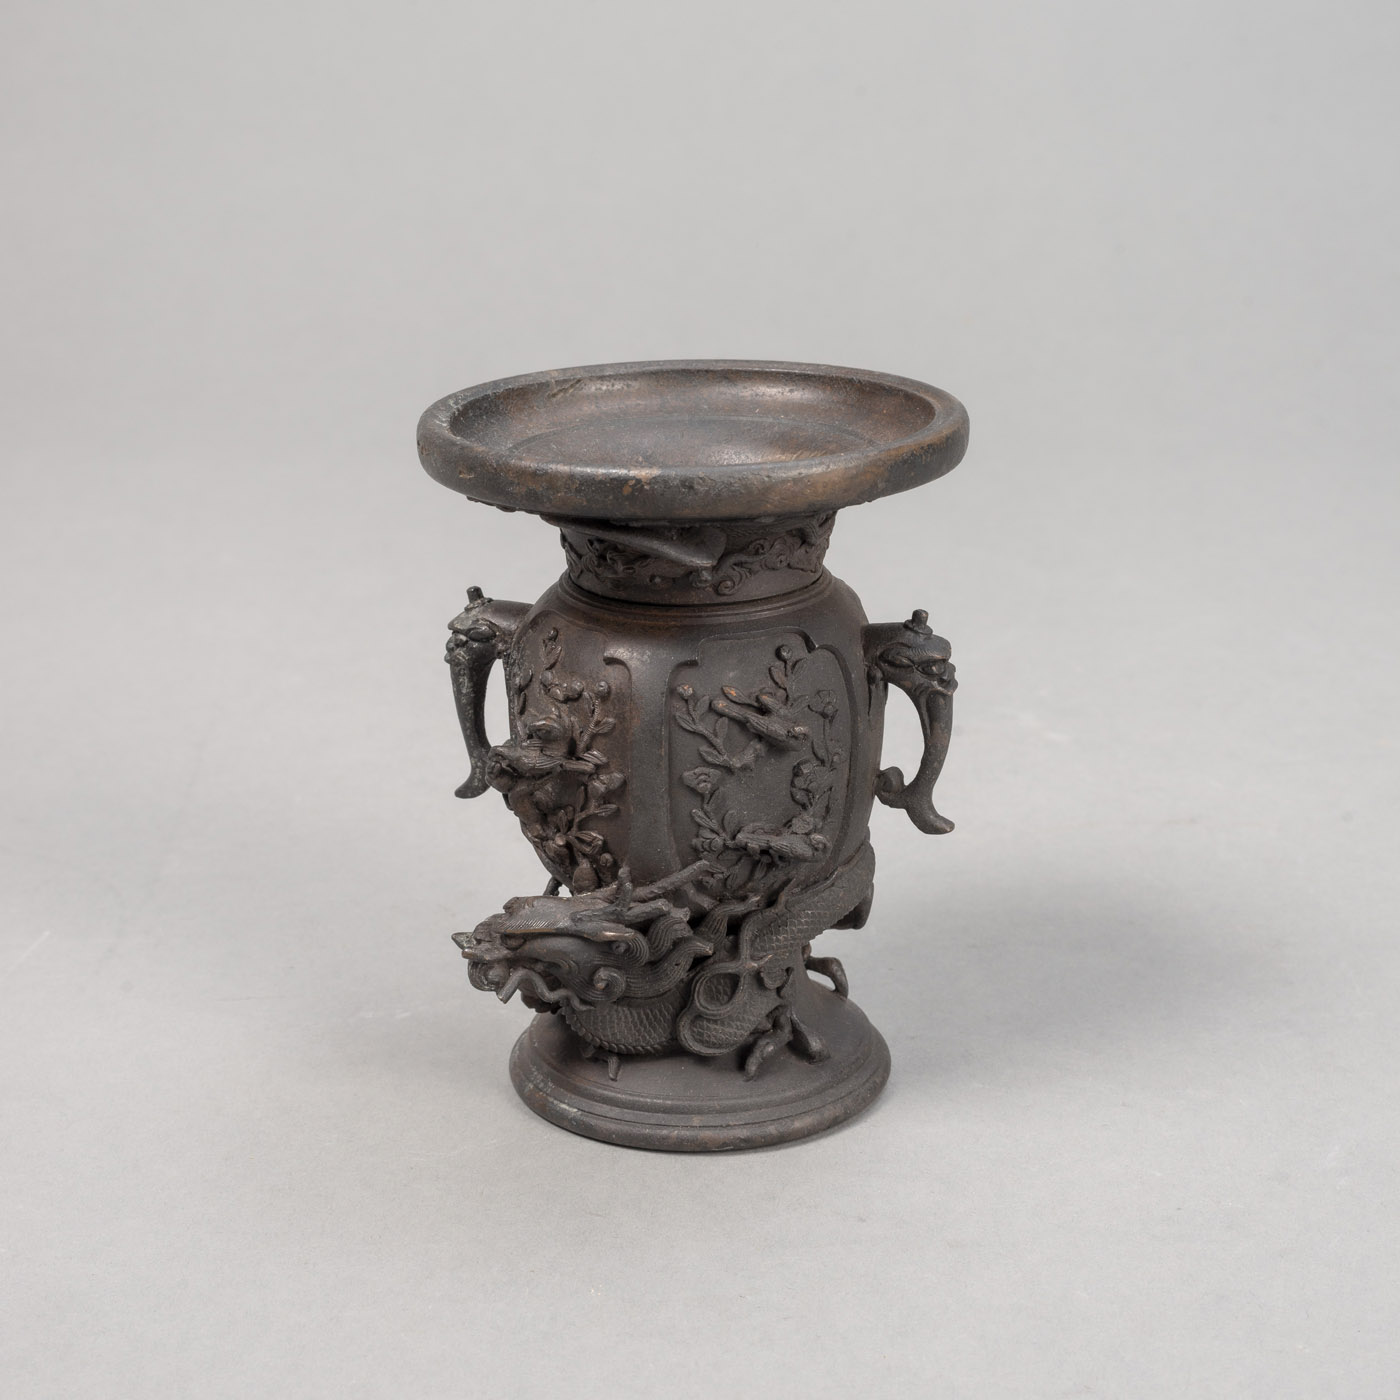 <b>A SMALL TWIN-HANDLED HIGH RELIEF DRAGON BRONZE VASE</b>